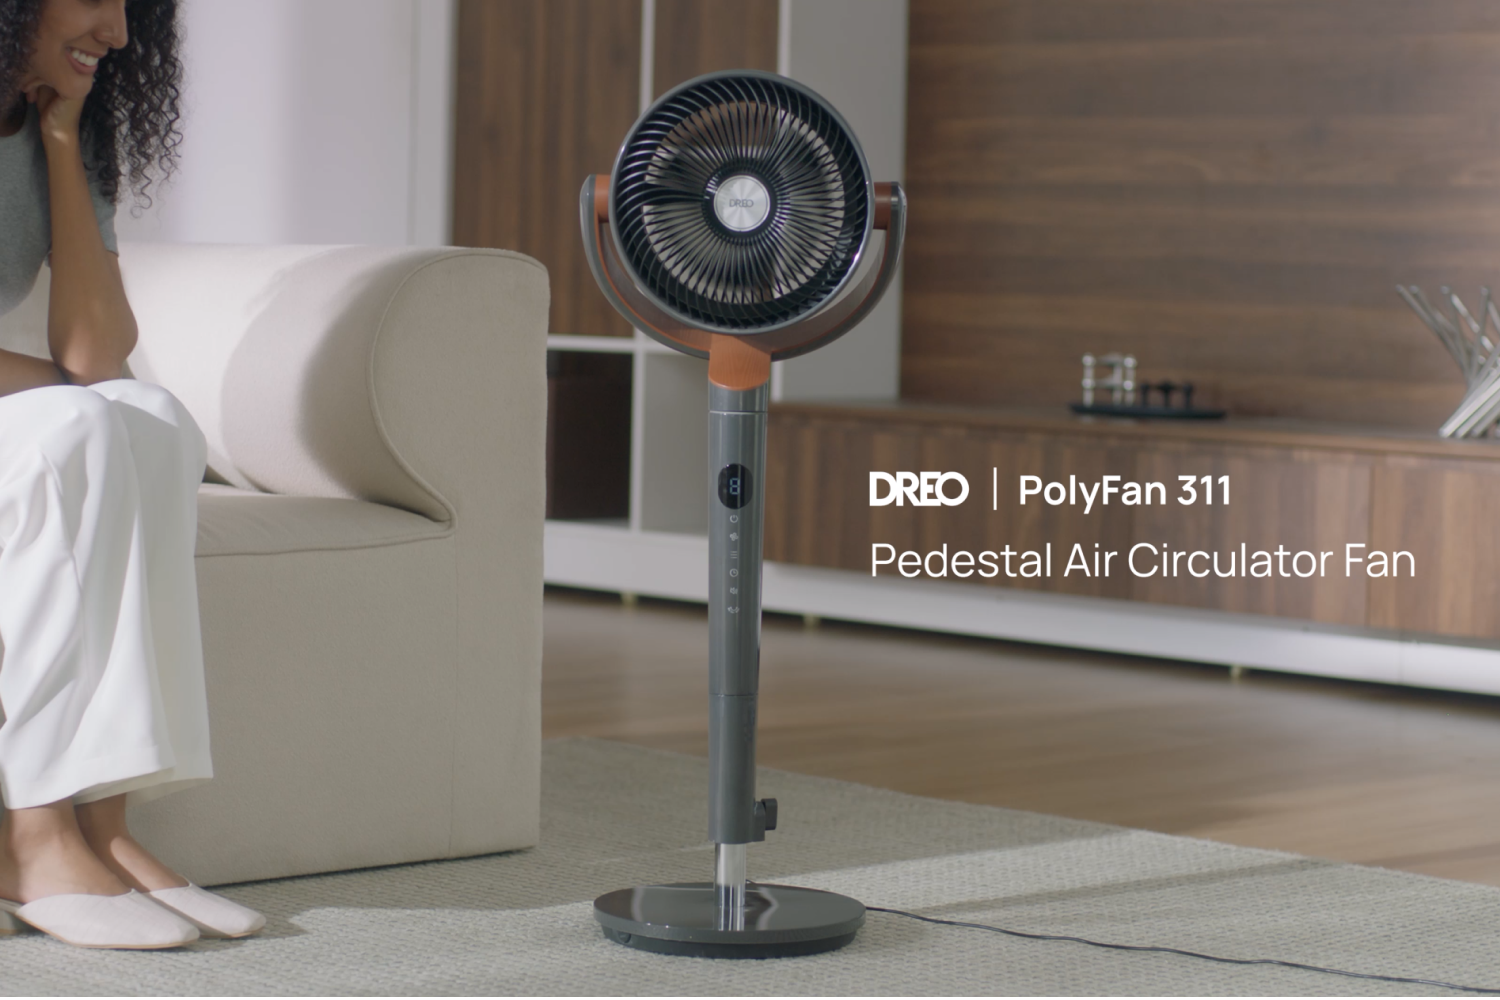 PolyFan 311 Product Video